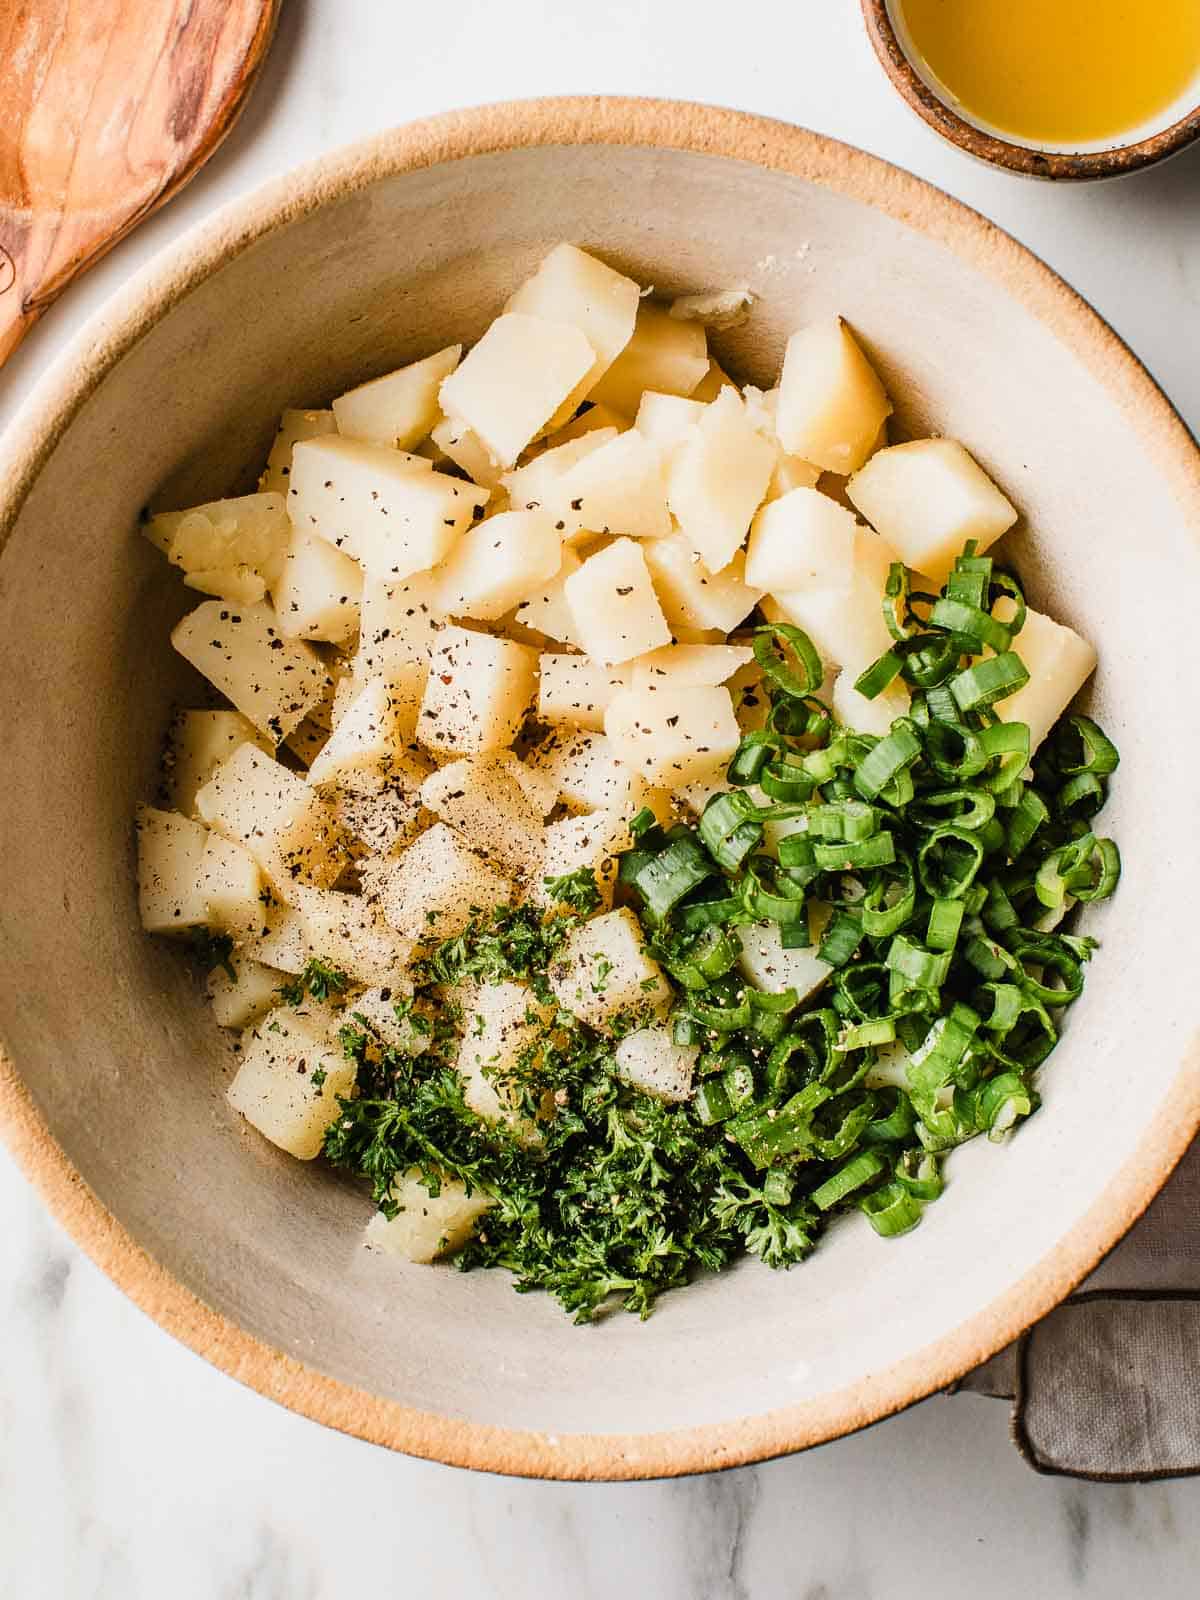 Cut potatoes and herbs in a bowl.